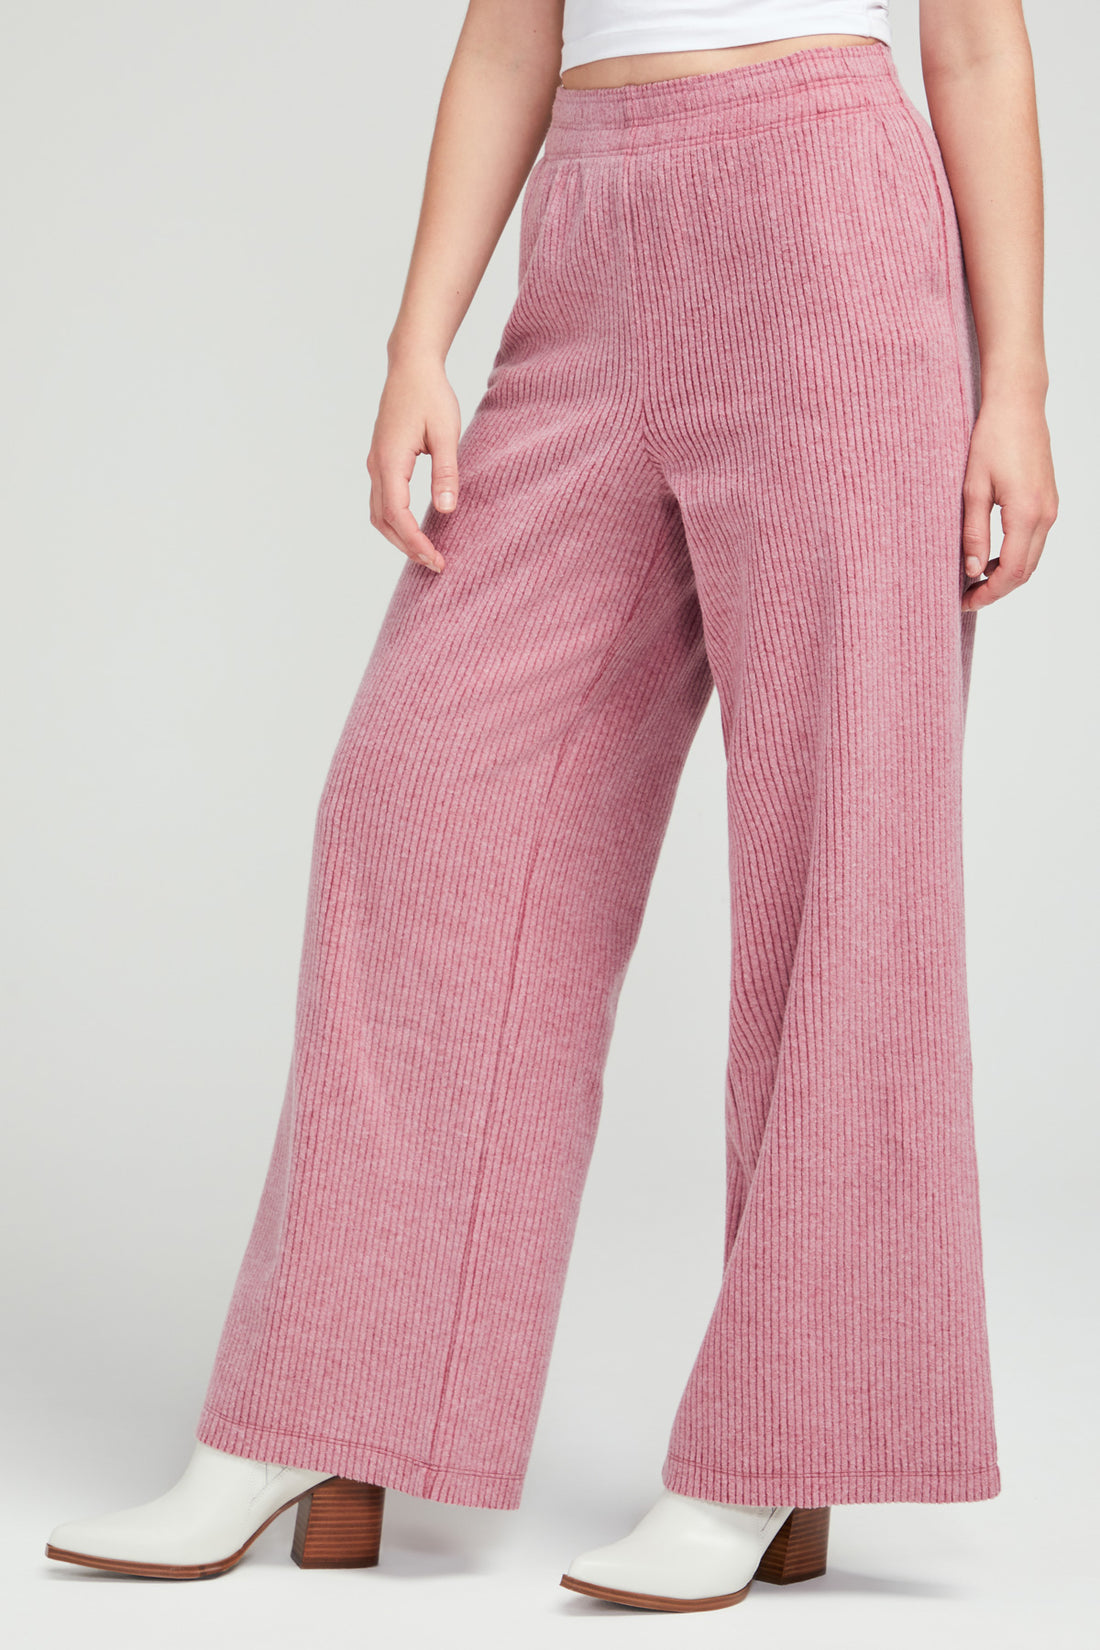 Wildfox Couture Tennis Club Pant in Crushed Berry